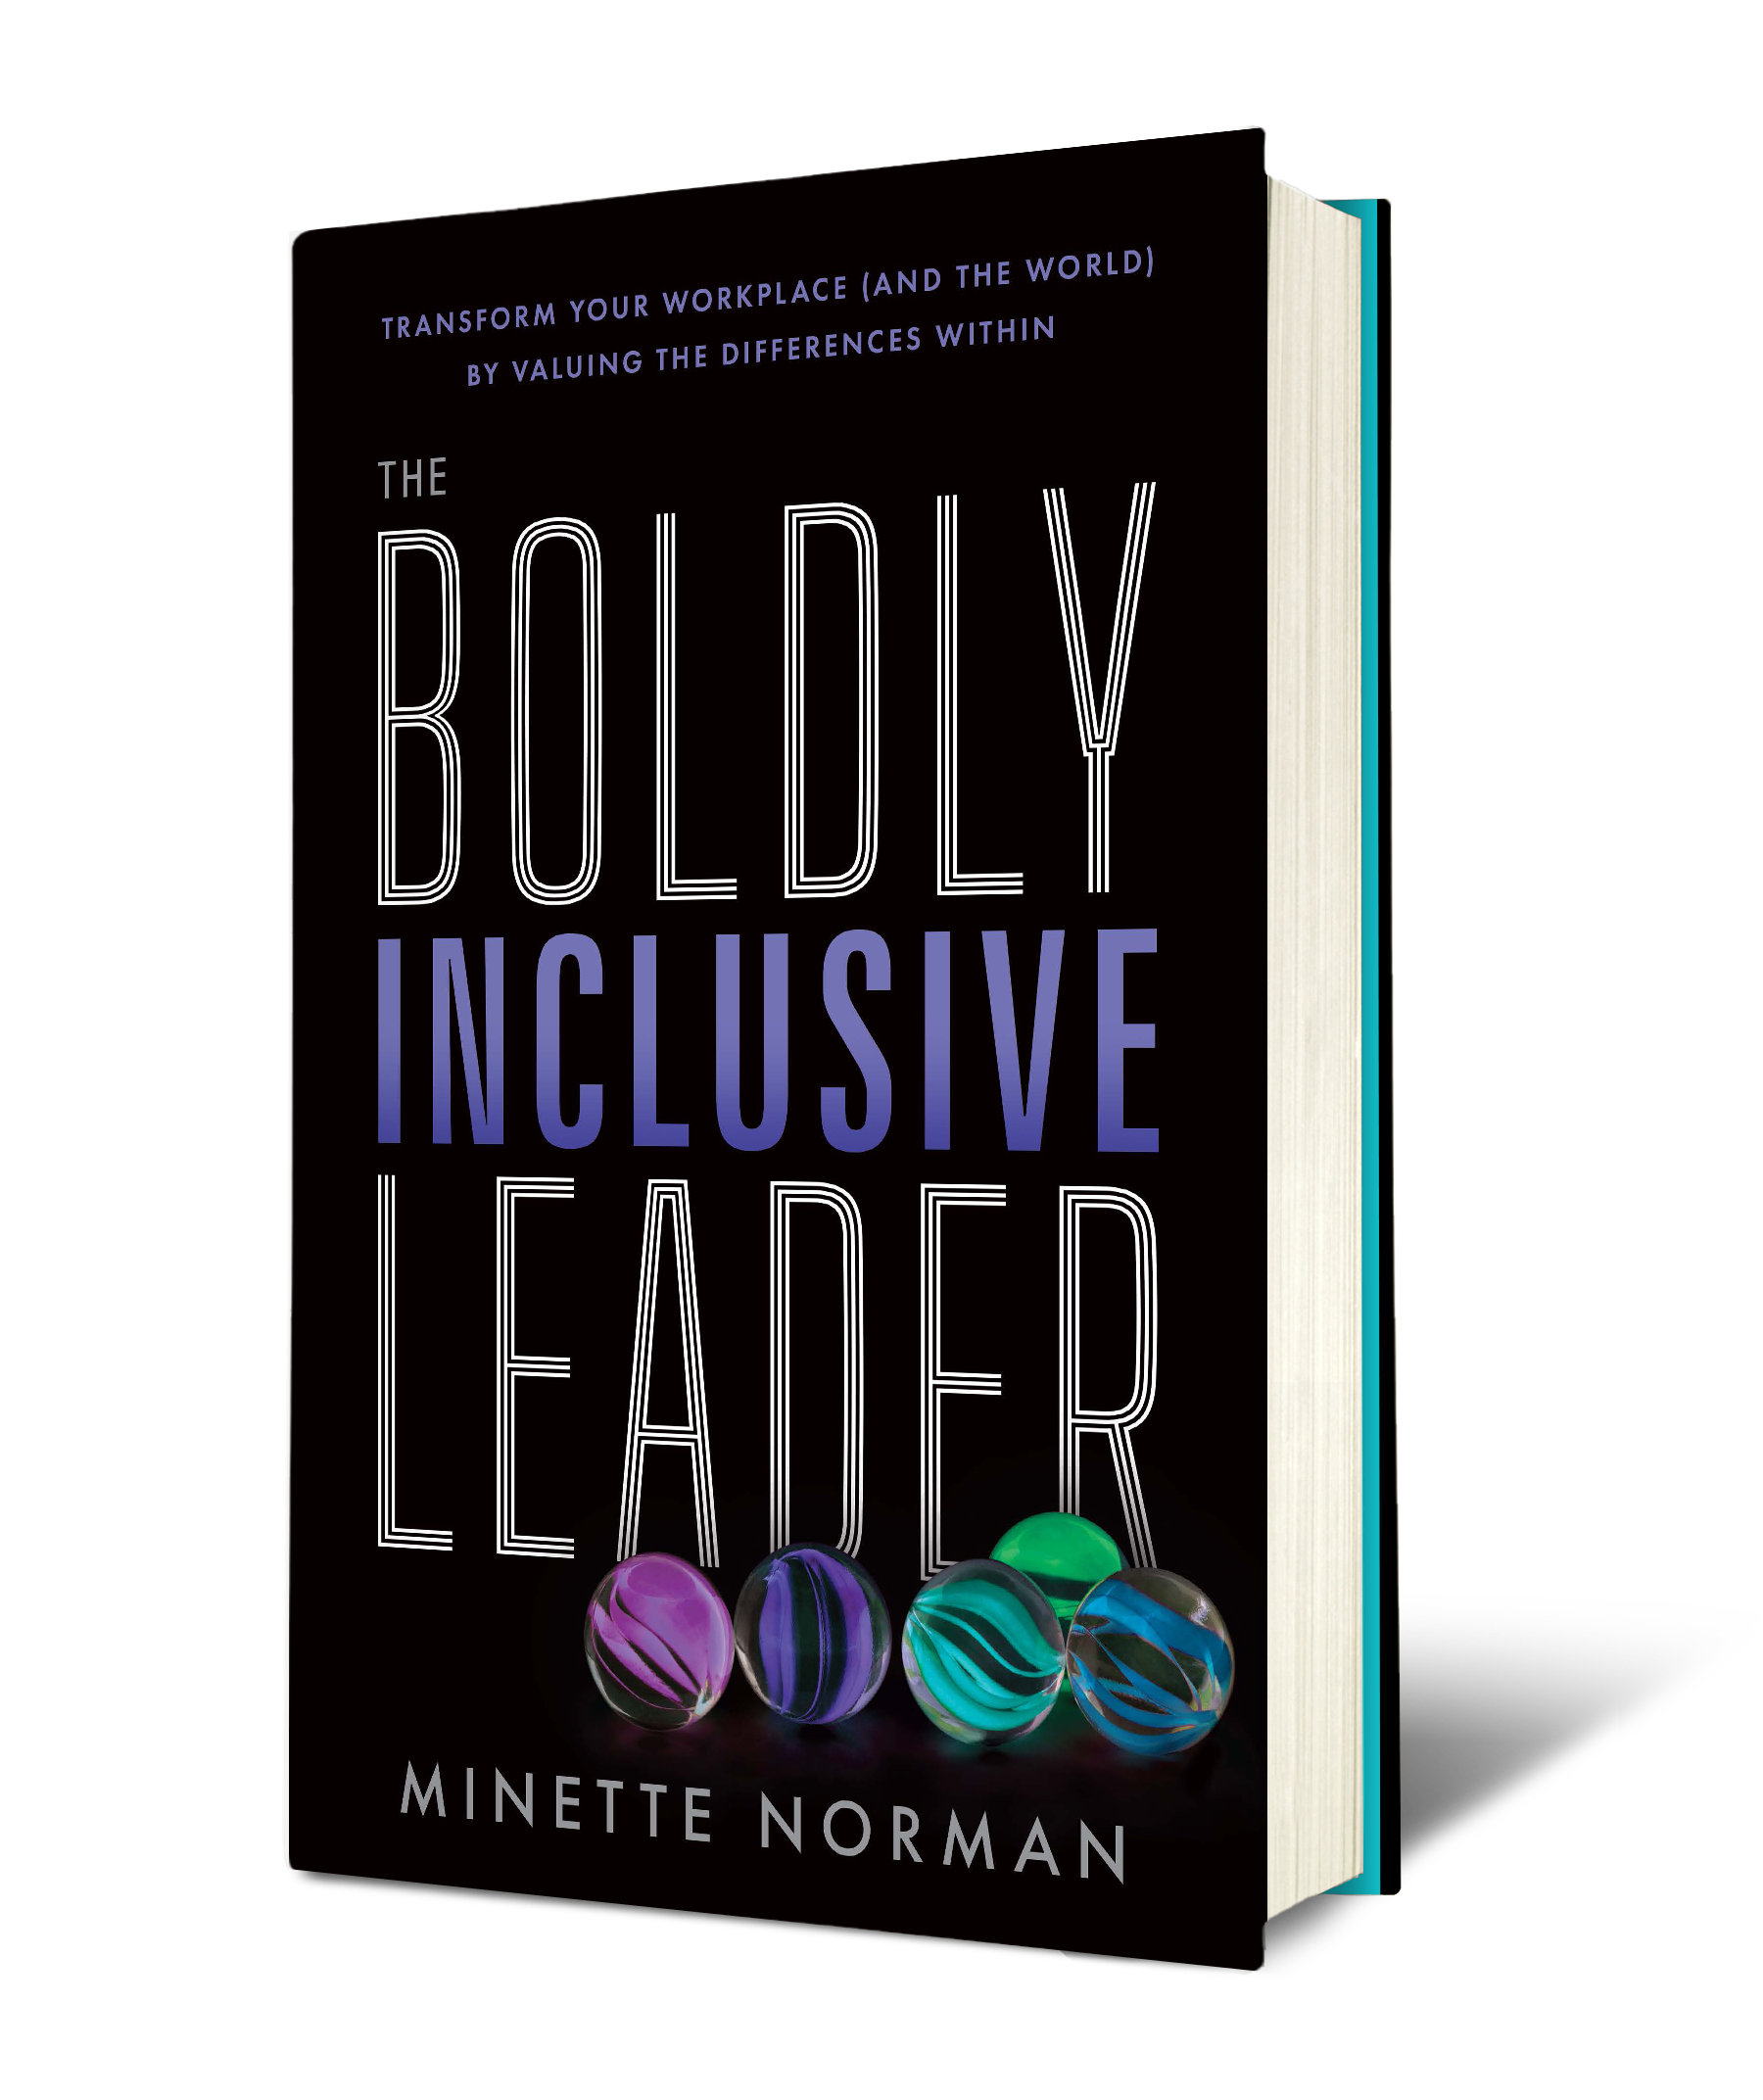 Cover for the book The Boldly Inclusive Leader: Transform Your Workplace (and the World) by Valuing the Differences Within by Minette Norman. Cover is black with white and periwinkle lettering and has a photo of multicolored marbles.